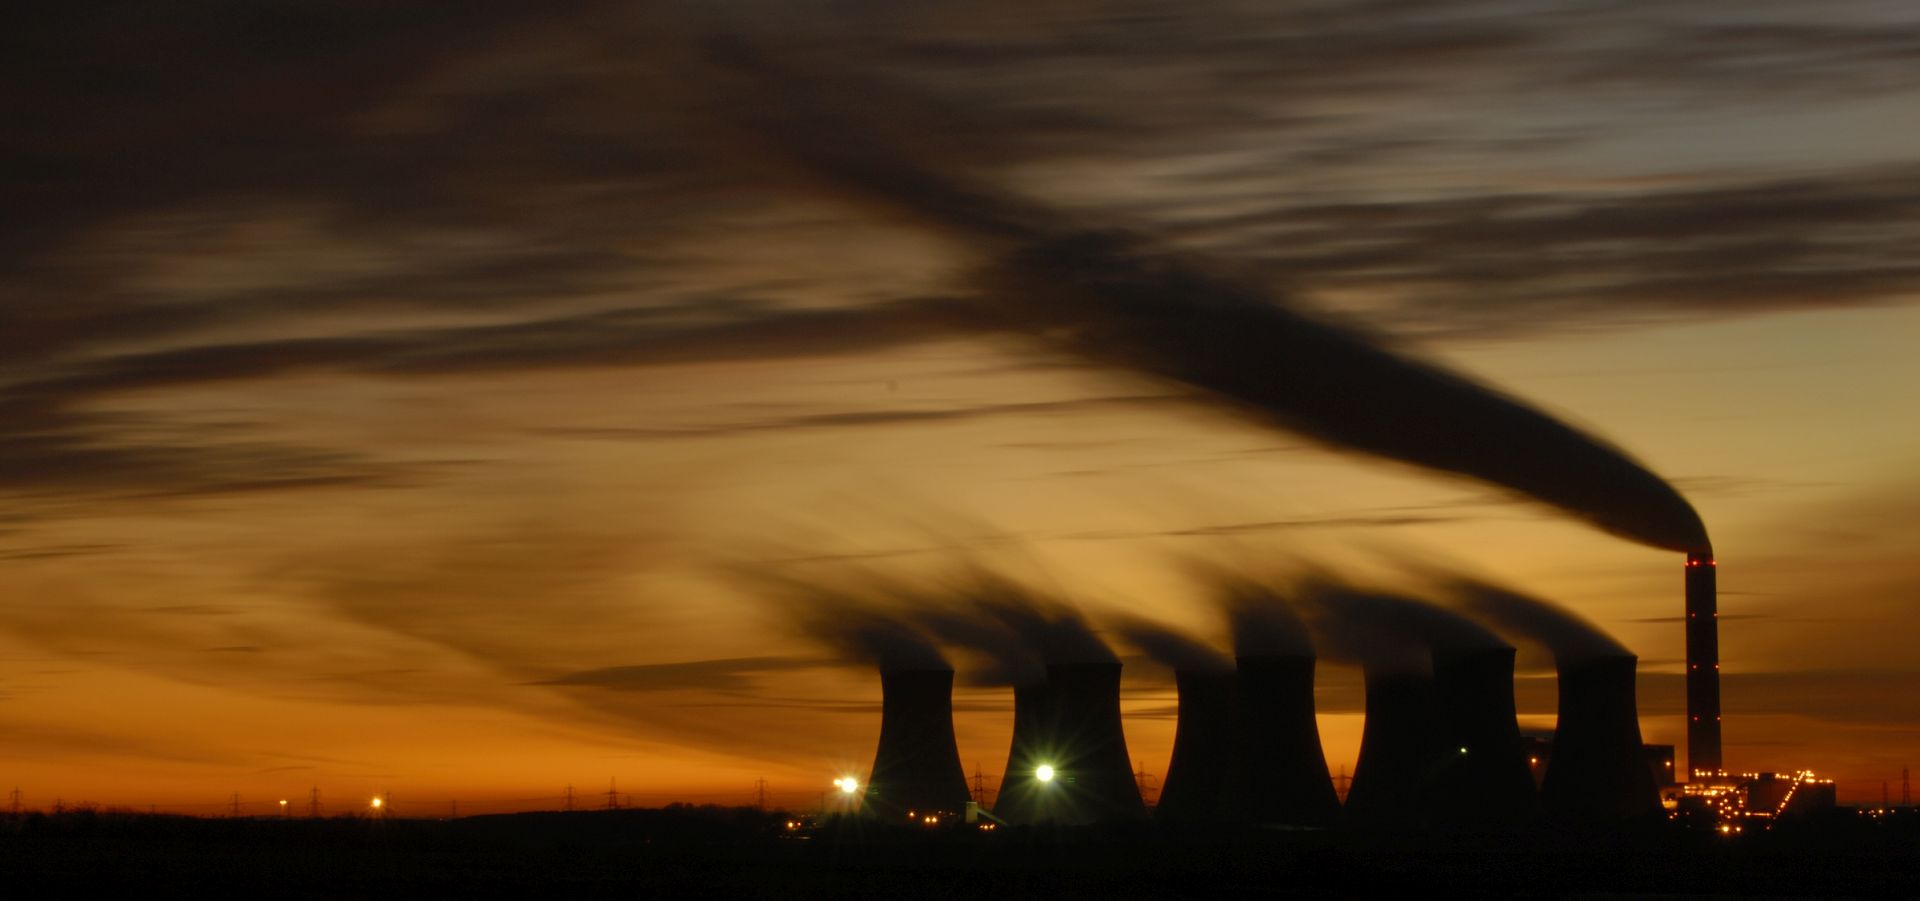 The towers of Cottam Power Station silhoutted against the sky at sunset